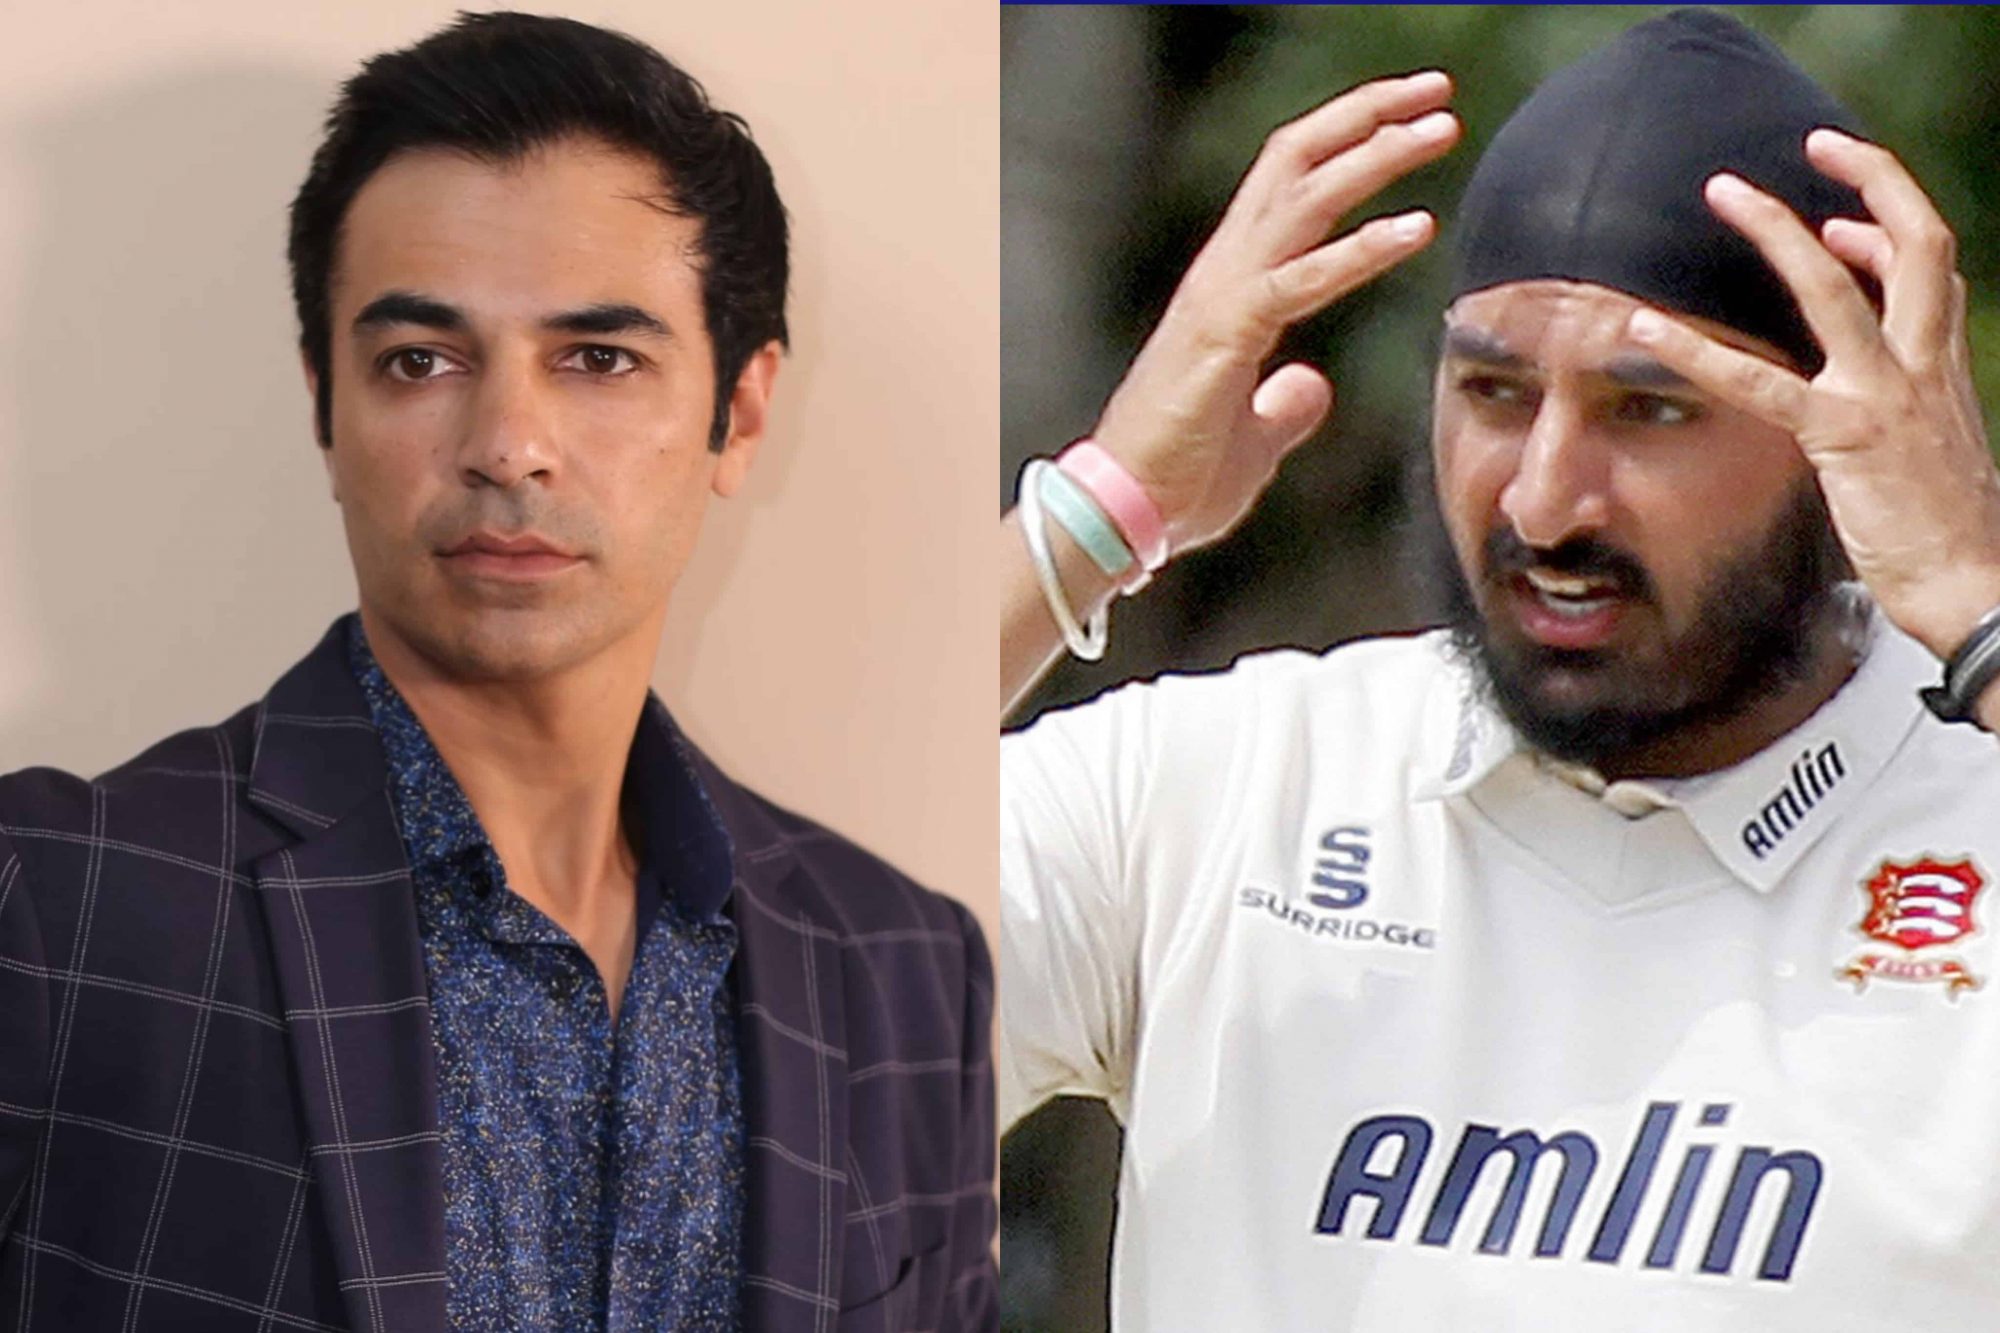 Don't Know What Logic He Has Used: Salman Butt Slams Panesar For Calling 'Team India More of Shastri's Team Than Kohli'